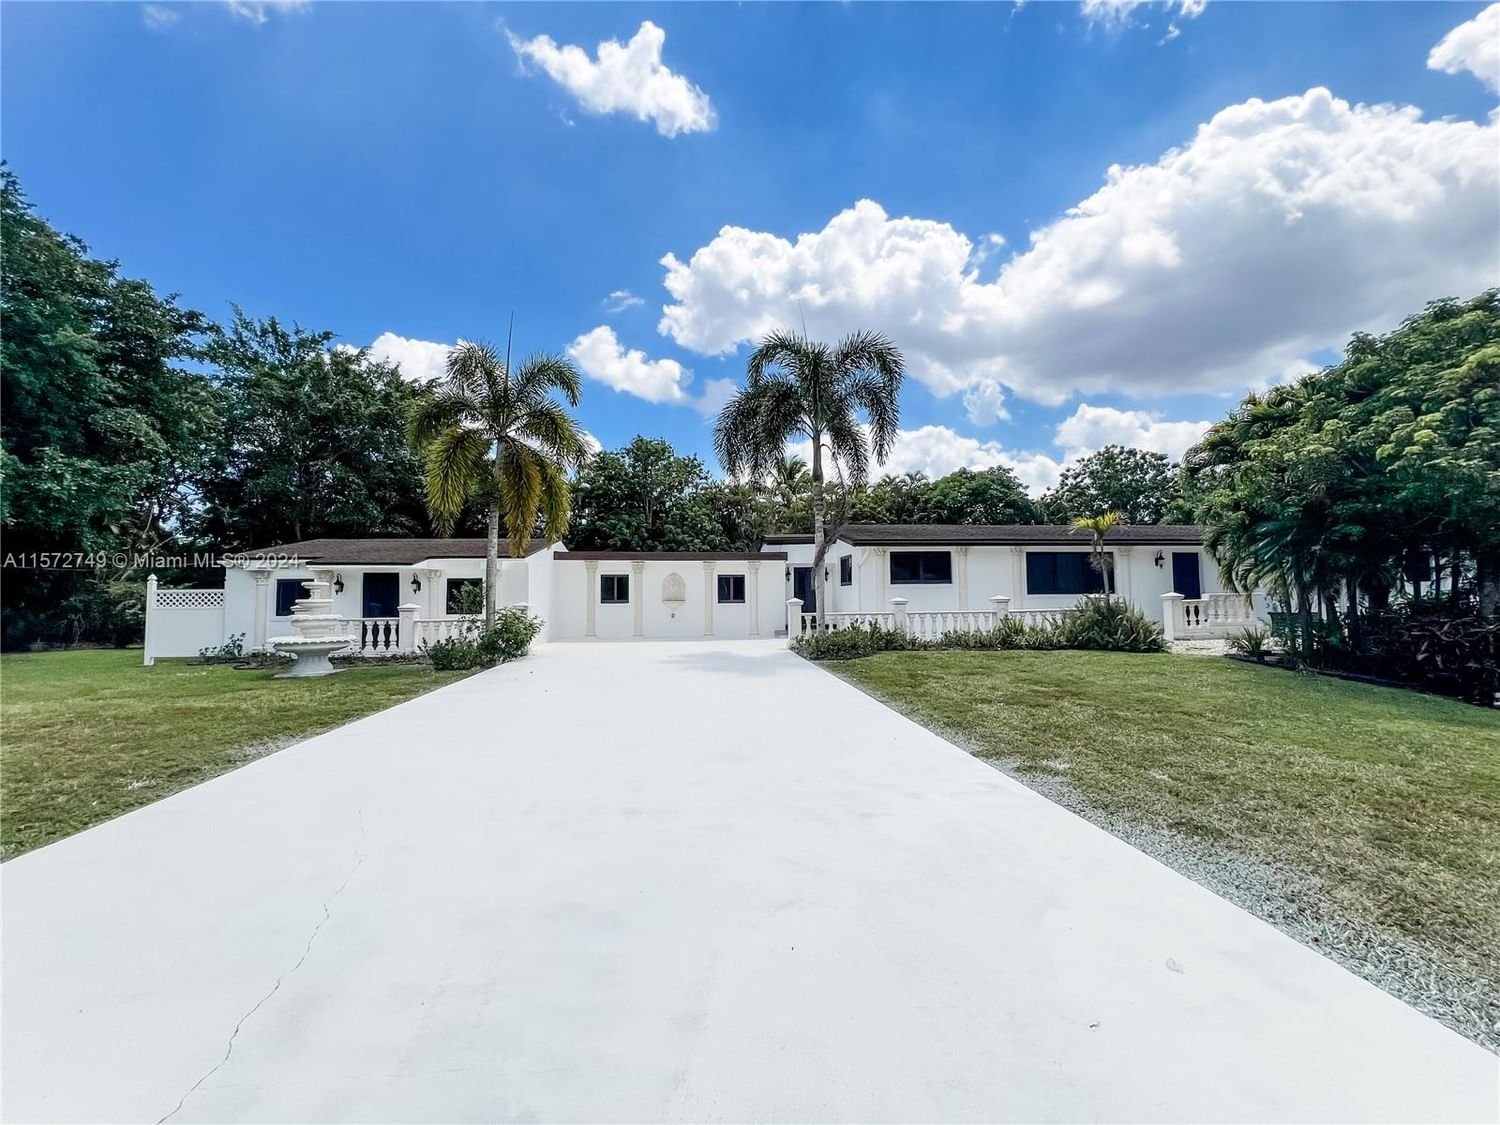 Real estate property located at 12200 20th Ct, Broward County, FLA FRUIT LANDS CO, Plantation, FL